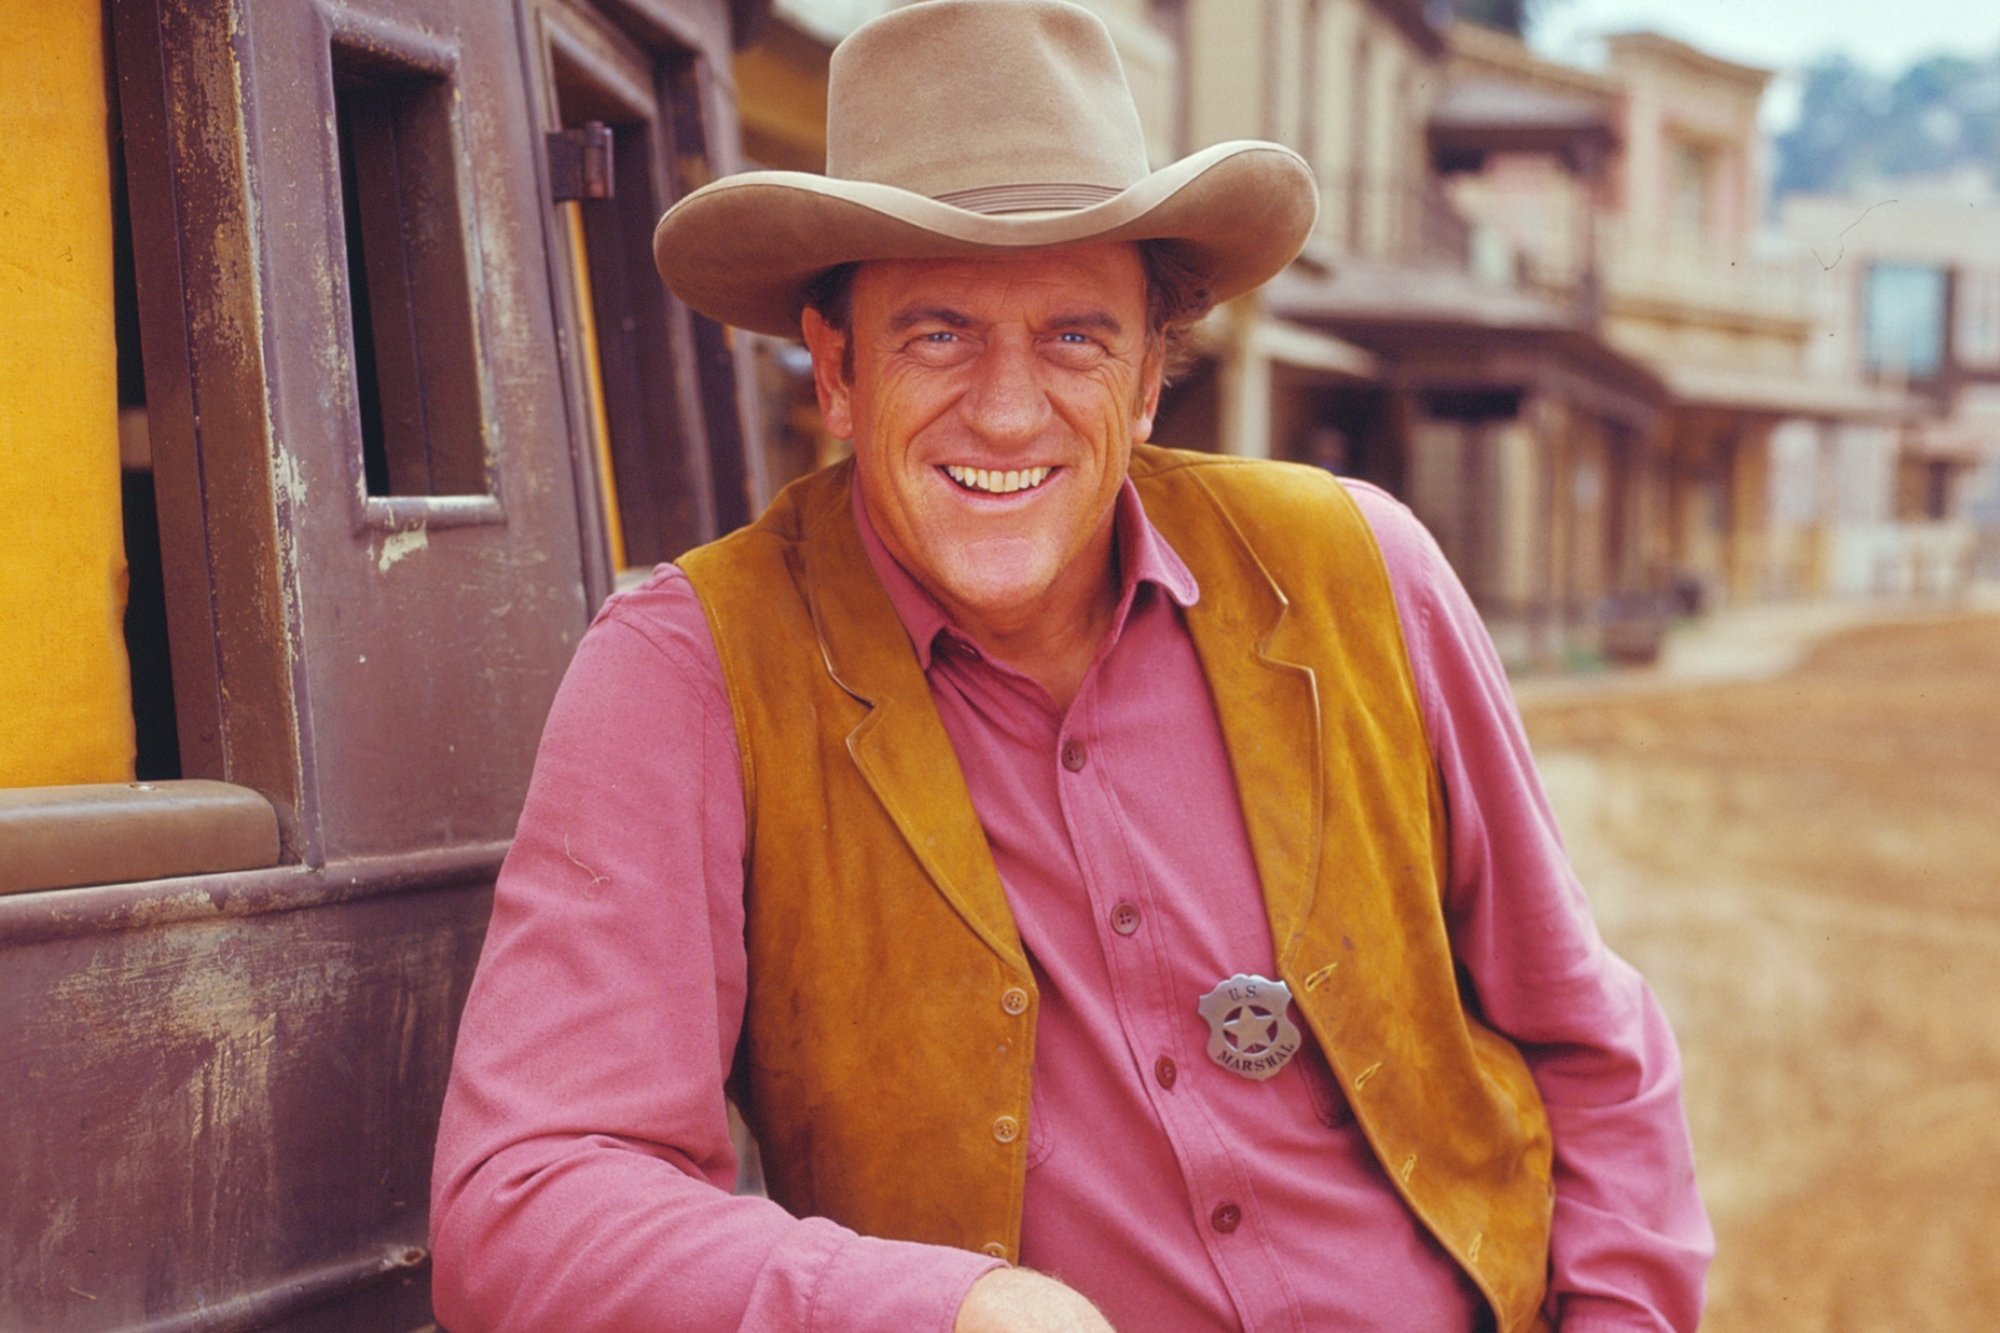 'Gunsmoke' actor James Arness as U. S. Marshal Matt Dillon leaning on carriage wearing a light tan vest and a pink-ish shirt. He has his badge on the shirt and is smiling.